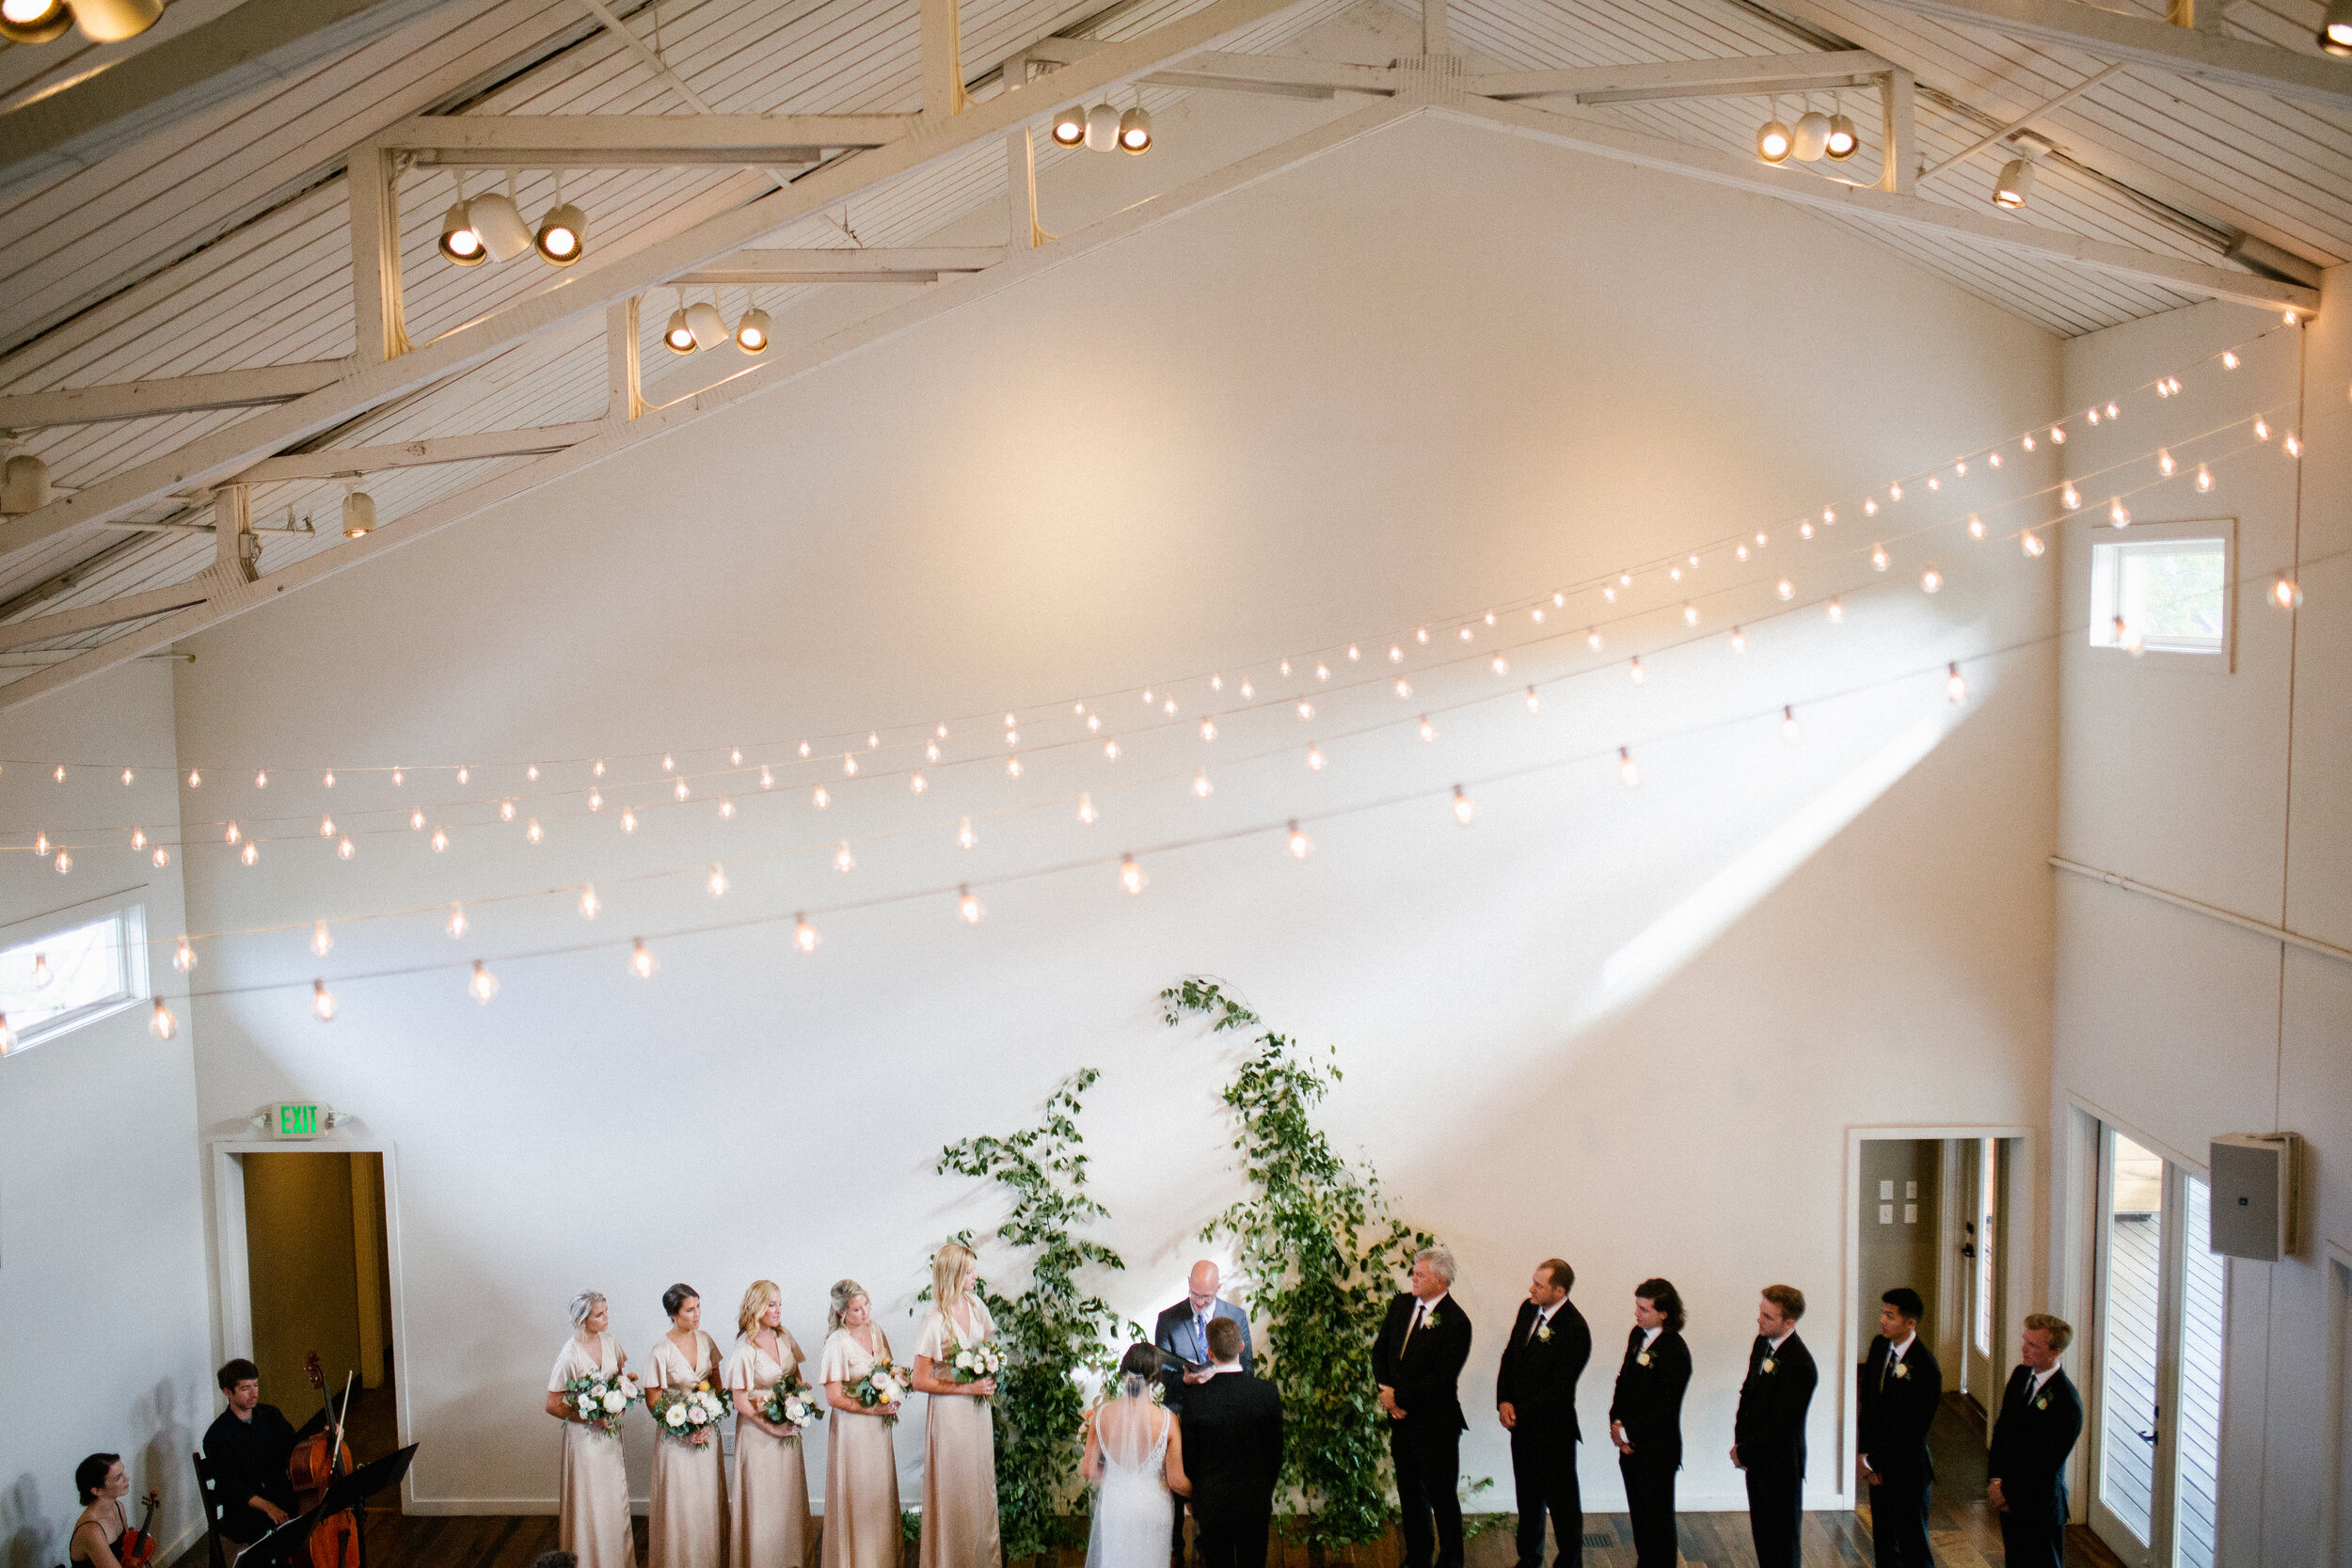 Vine-like greenery installation - creating an arch on the white wall at the Cordelle as the wedding ceremony backdrop. Nashville wedding floral design.